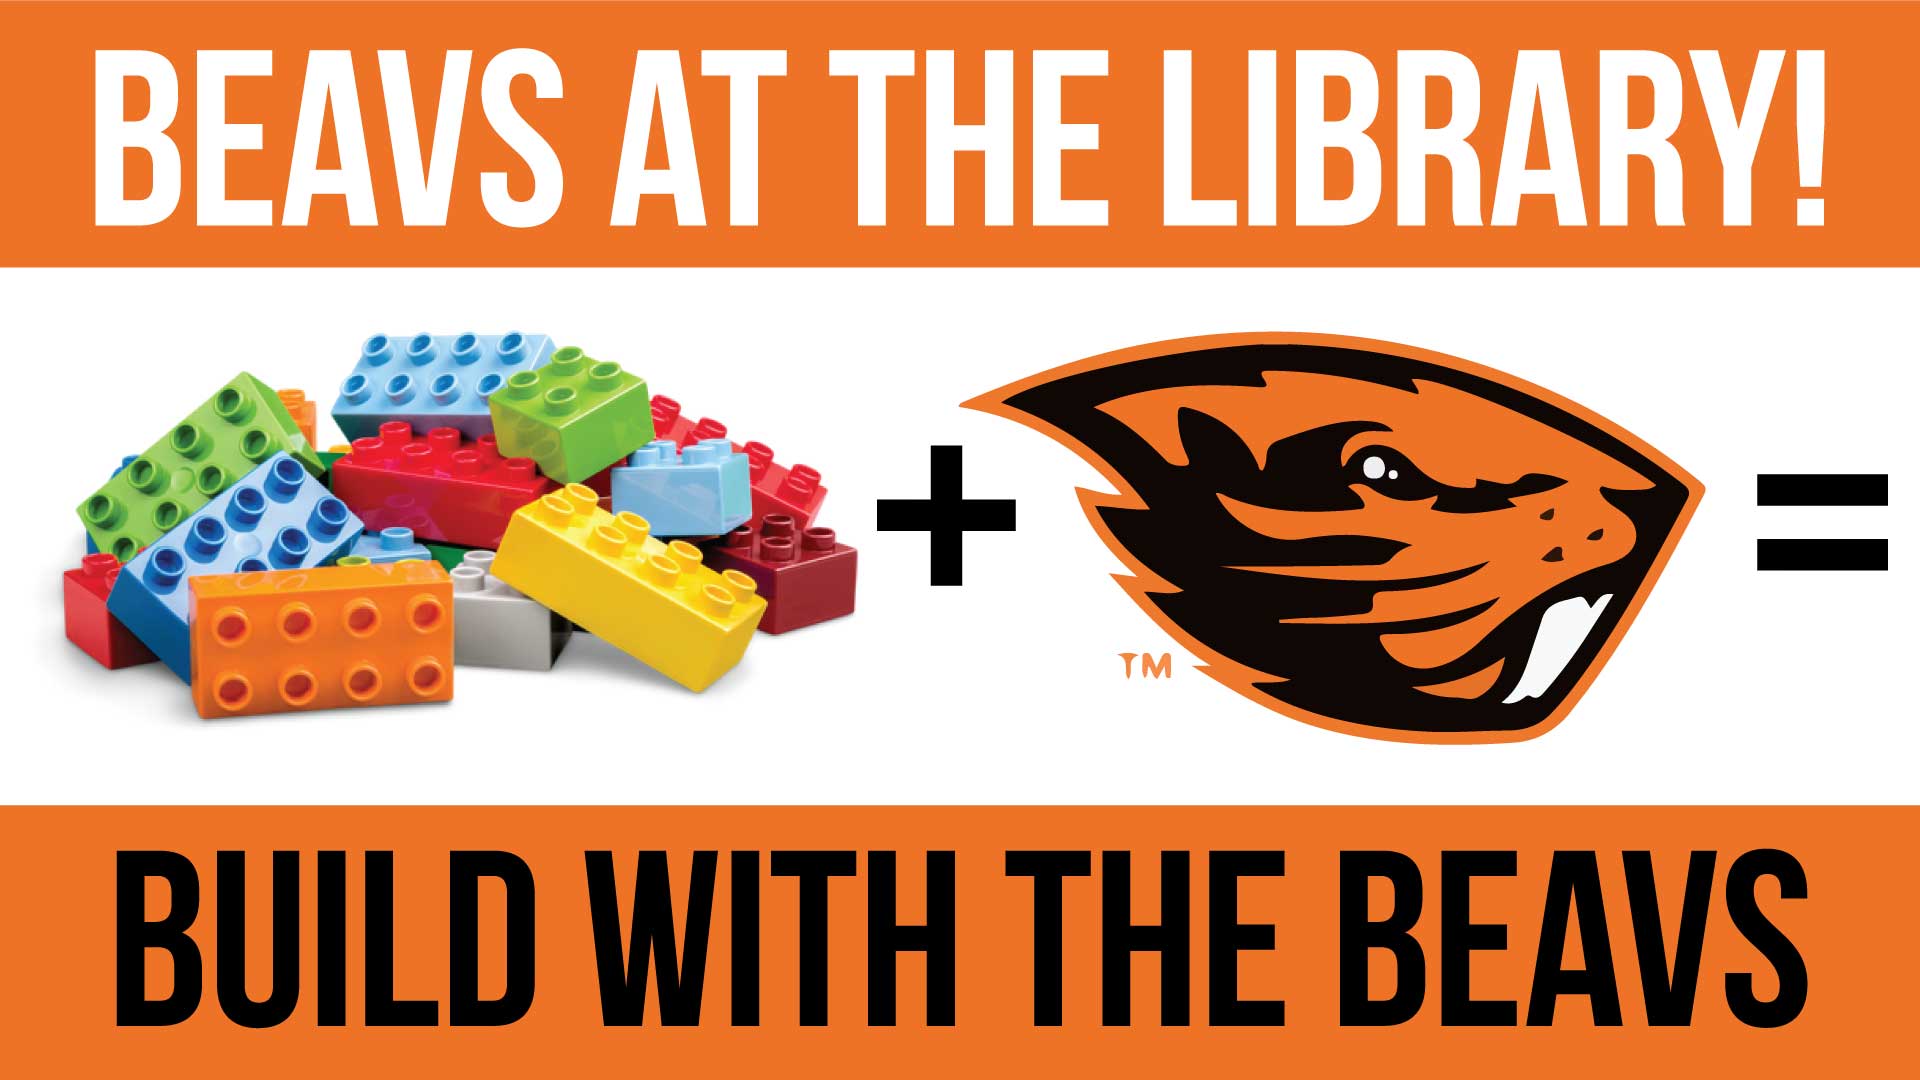 Beavs at the Library: Build with the Beavs. Image of bricks plus the OSU Beaver Logo